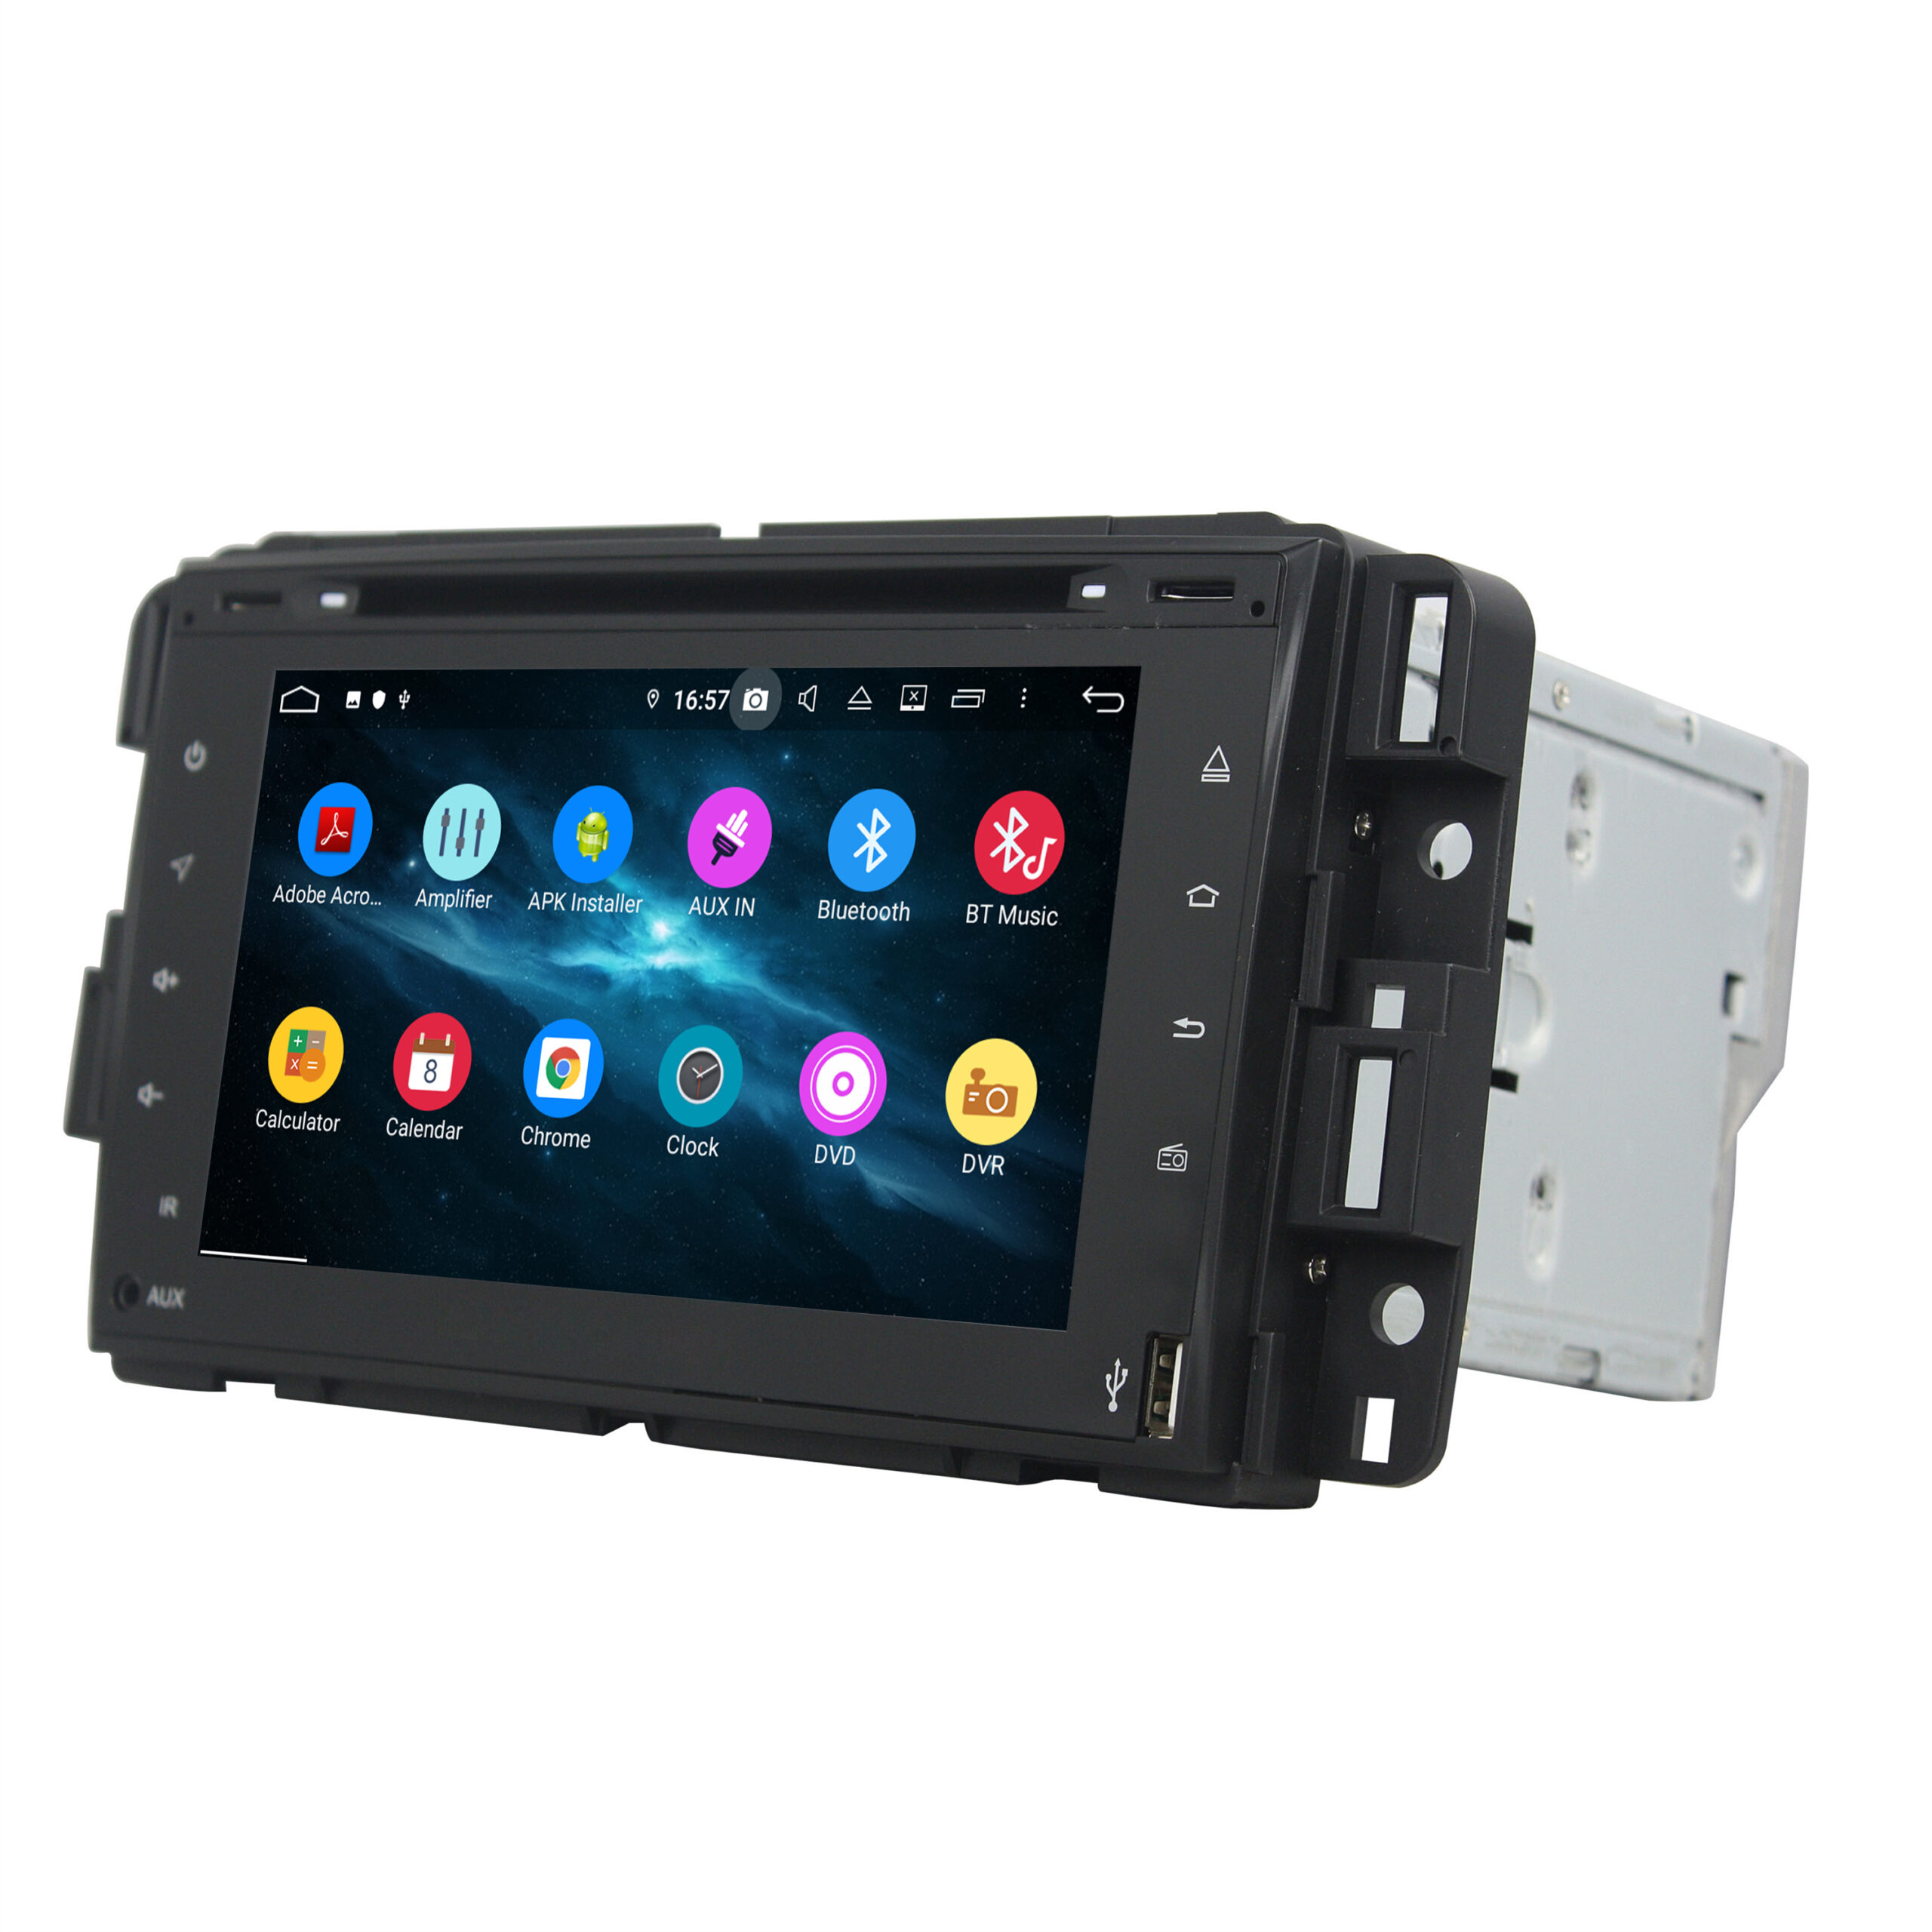 KD-7409 KLYDE Android Car Stereo DVD Player with GPS Navigation For GMC Yukon/Tahoe